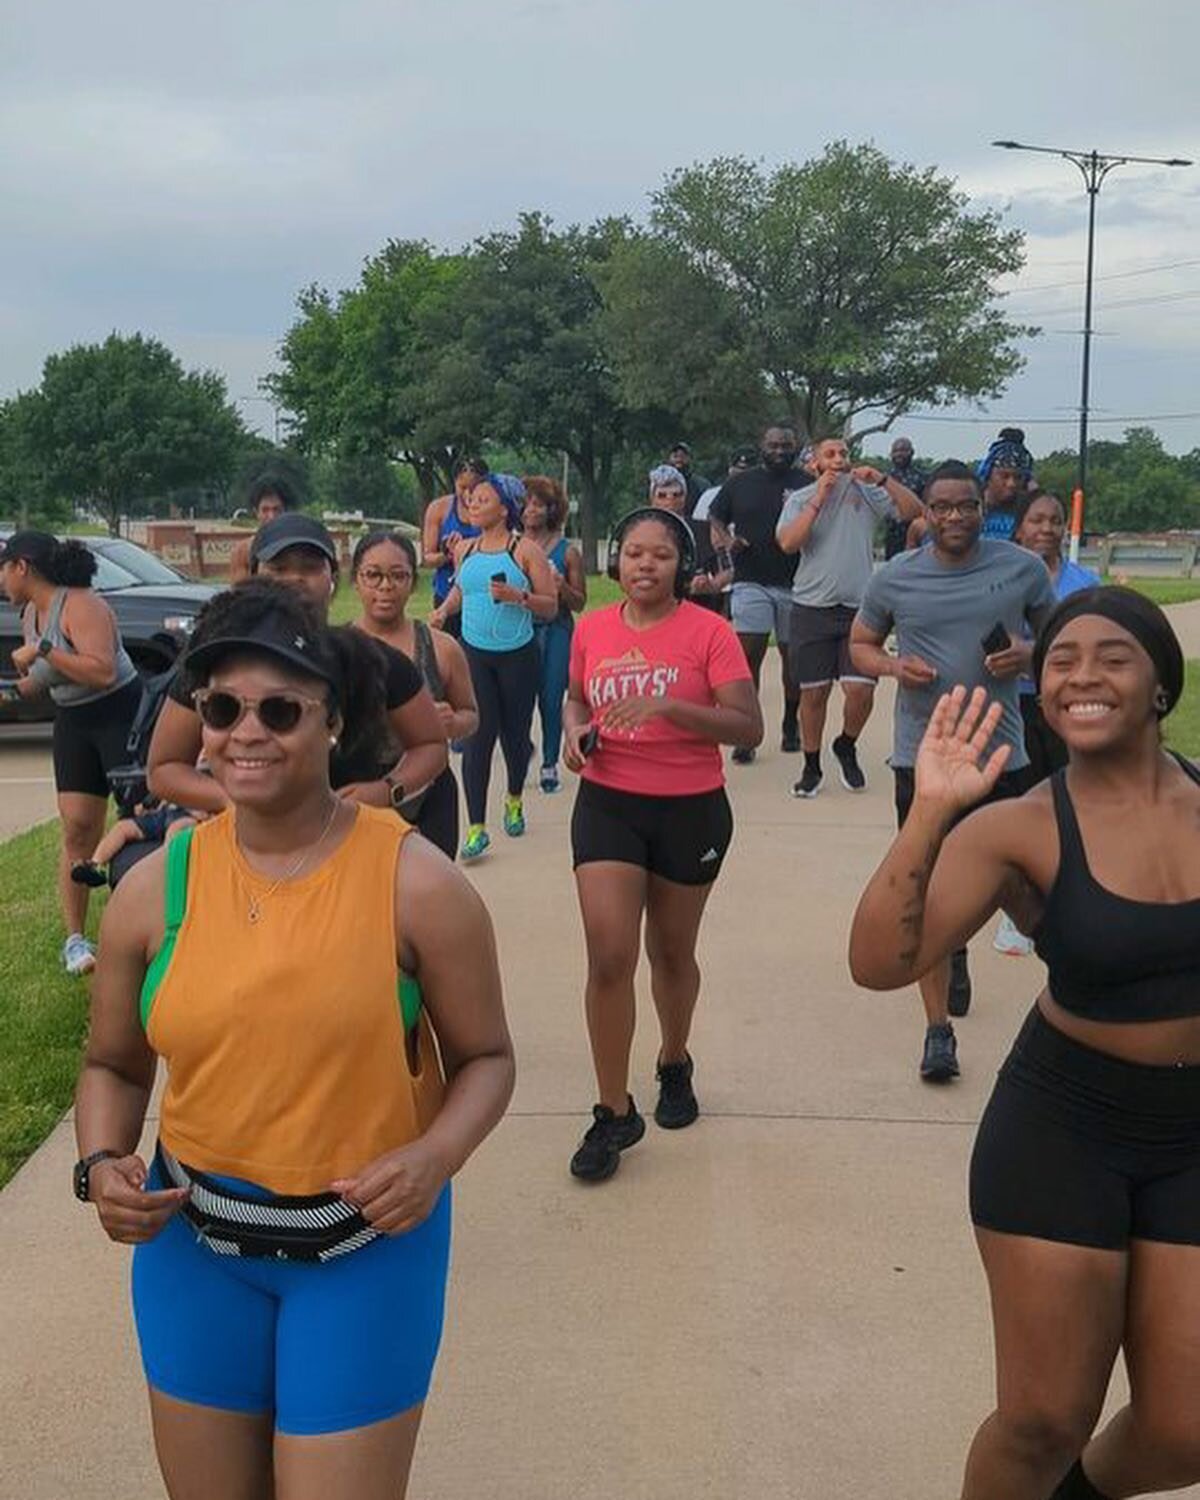 Who is ready to run with the Zquad this week?! 

Let&rsquo;s us know in the comments which one of our runs you&rsquo;ll be attending! 

Wednesday Social Run&hellip;

Saturday Morning Easy Pace Run&hellip;

Sunday Runday&hellip;

ALL 3 😉&hellip;

#we